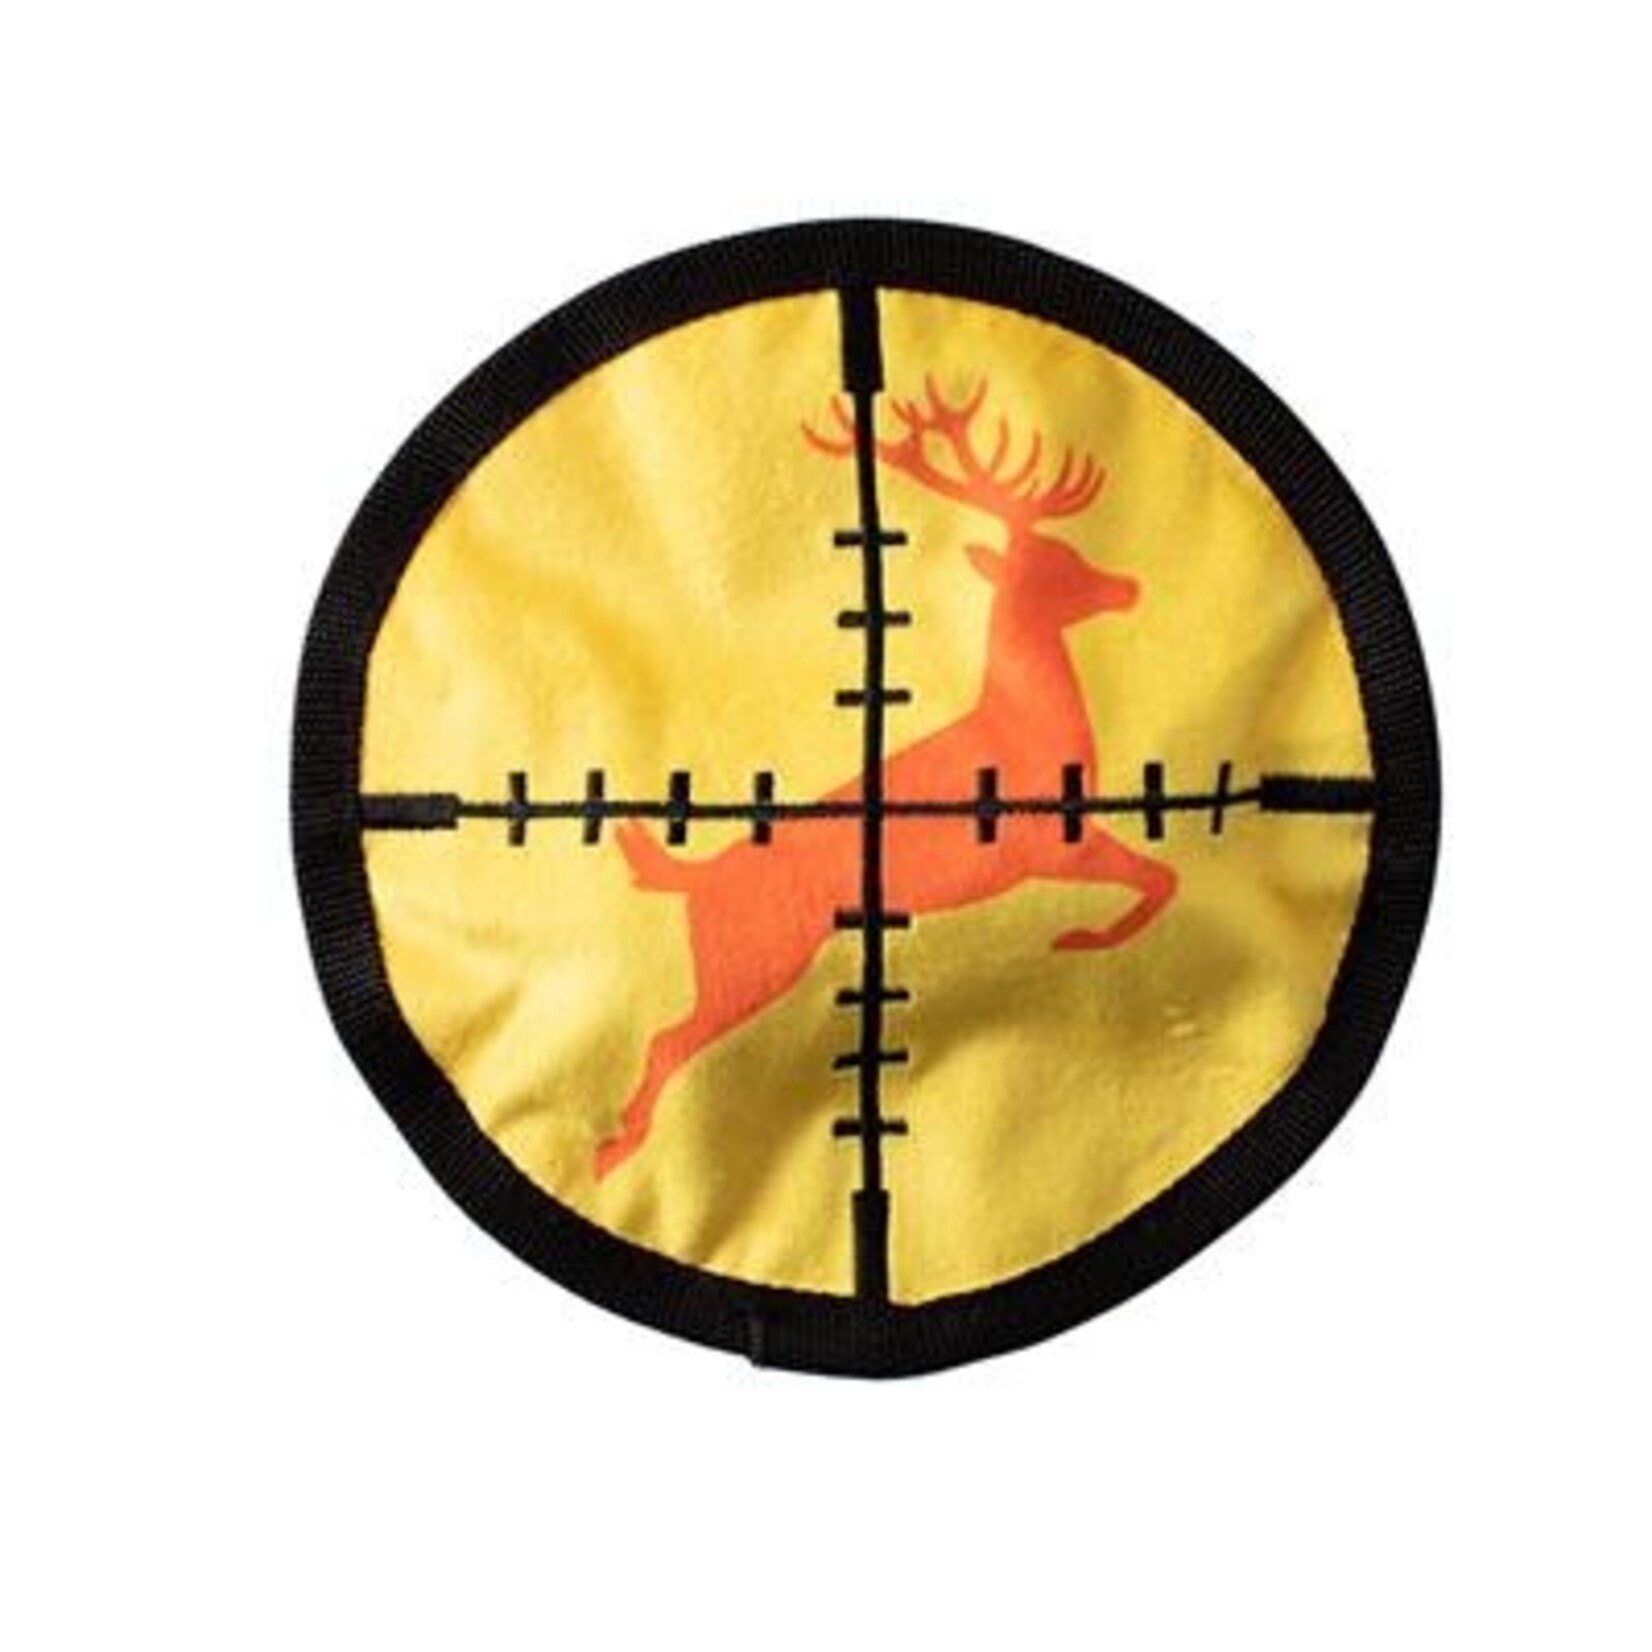 Wagsdale You're In My Crosshairs (Scope Deer Hunting Target) - Round Unstuffed Dog Toy - Wagsdale